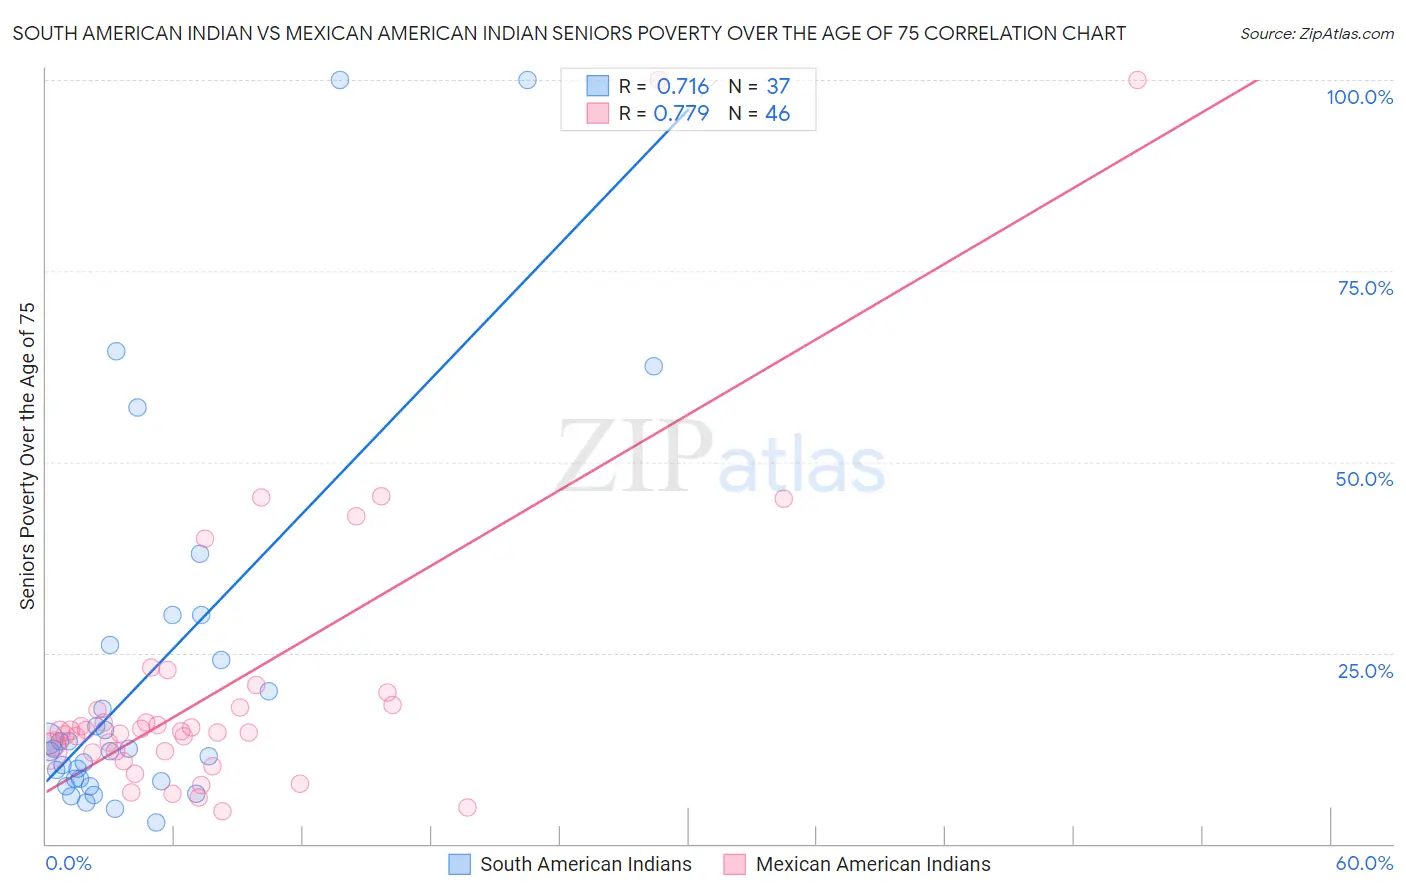 South American Indian vs Mexican American Indian Seniors Poverty Over the Age of 75